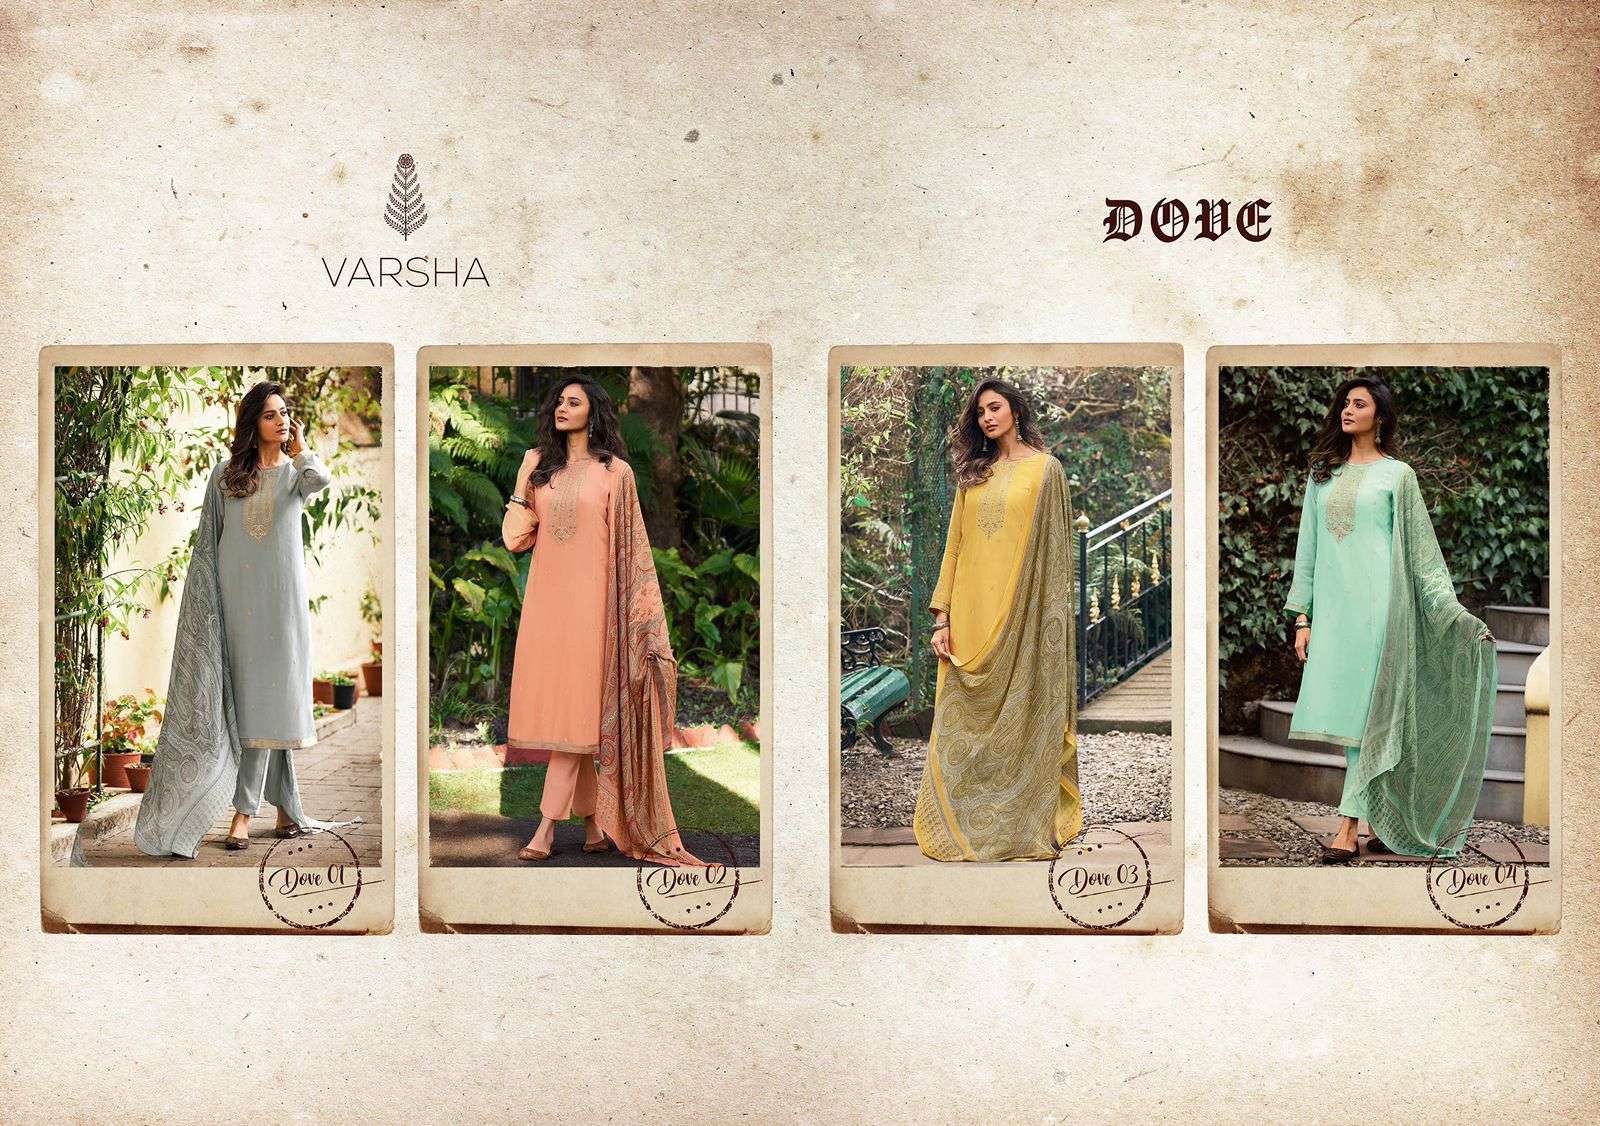 MILANO BY VARSHA FASHION FANCY FABRIC UNSTICHED SALWAR SUITS WHOLESALE 3 PCS